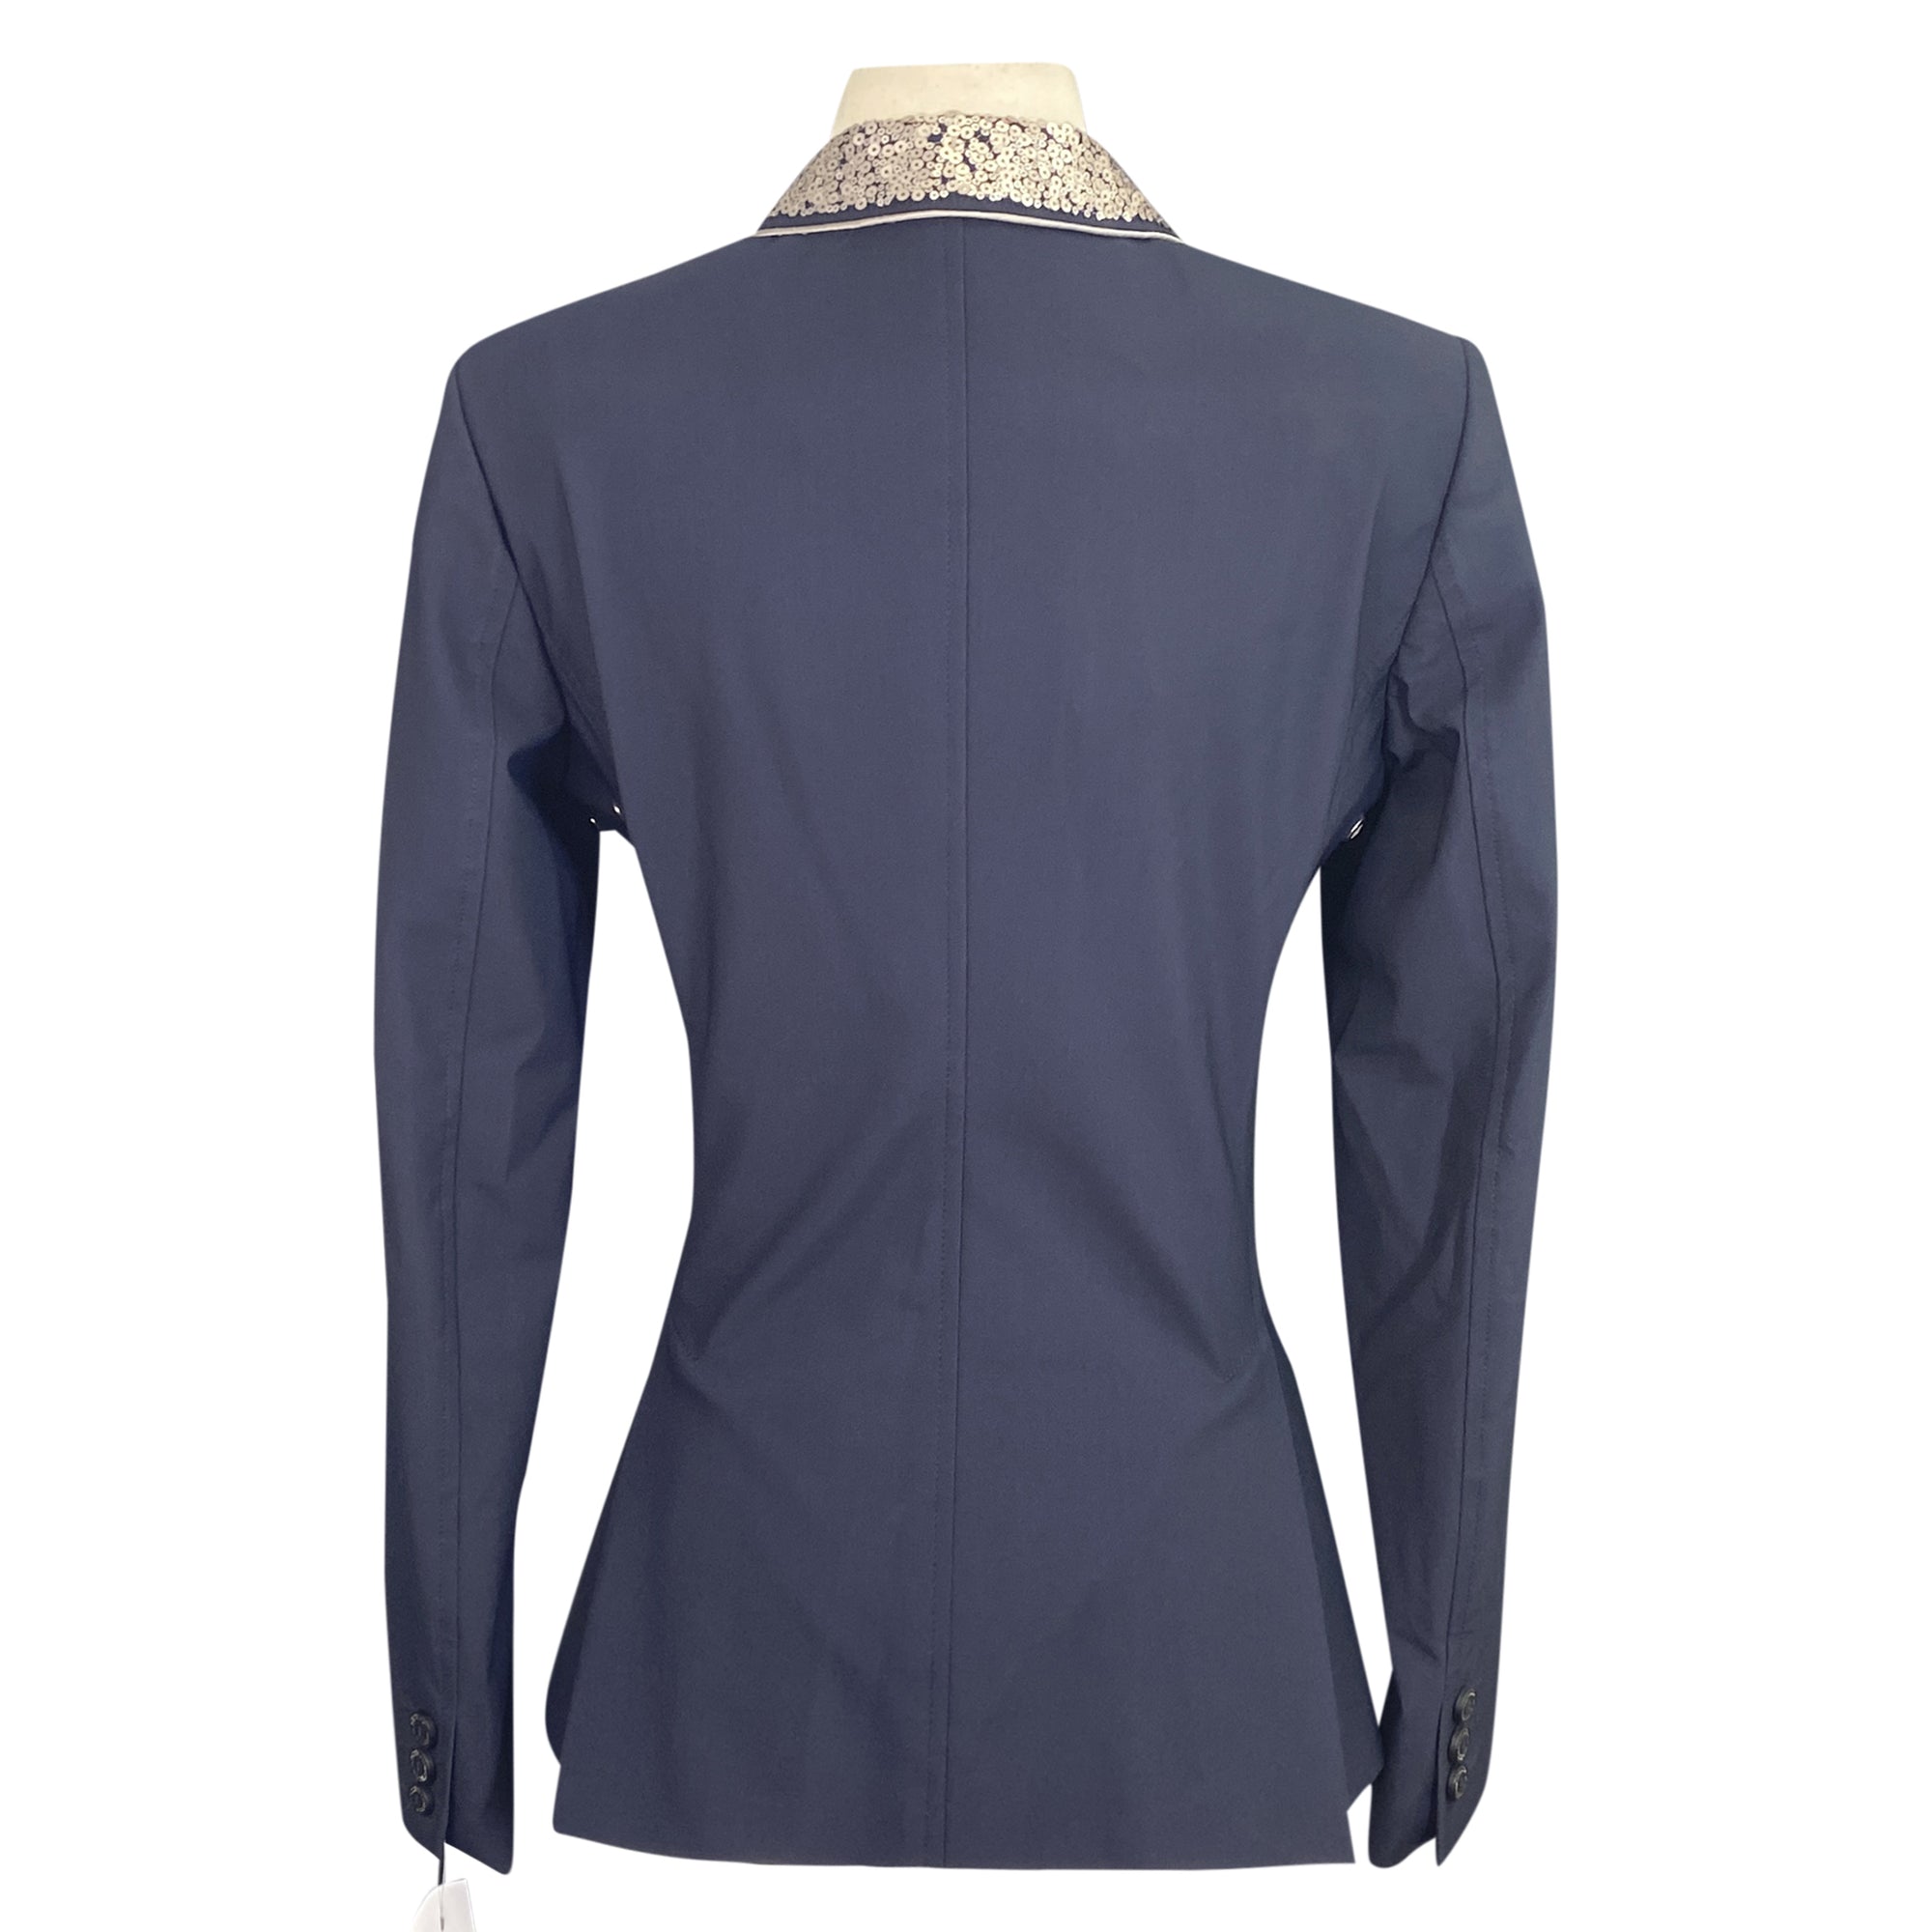 Equiline 'Amice' Competition Jacket in Navy